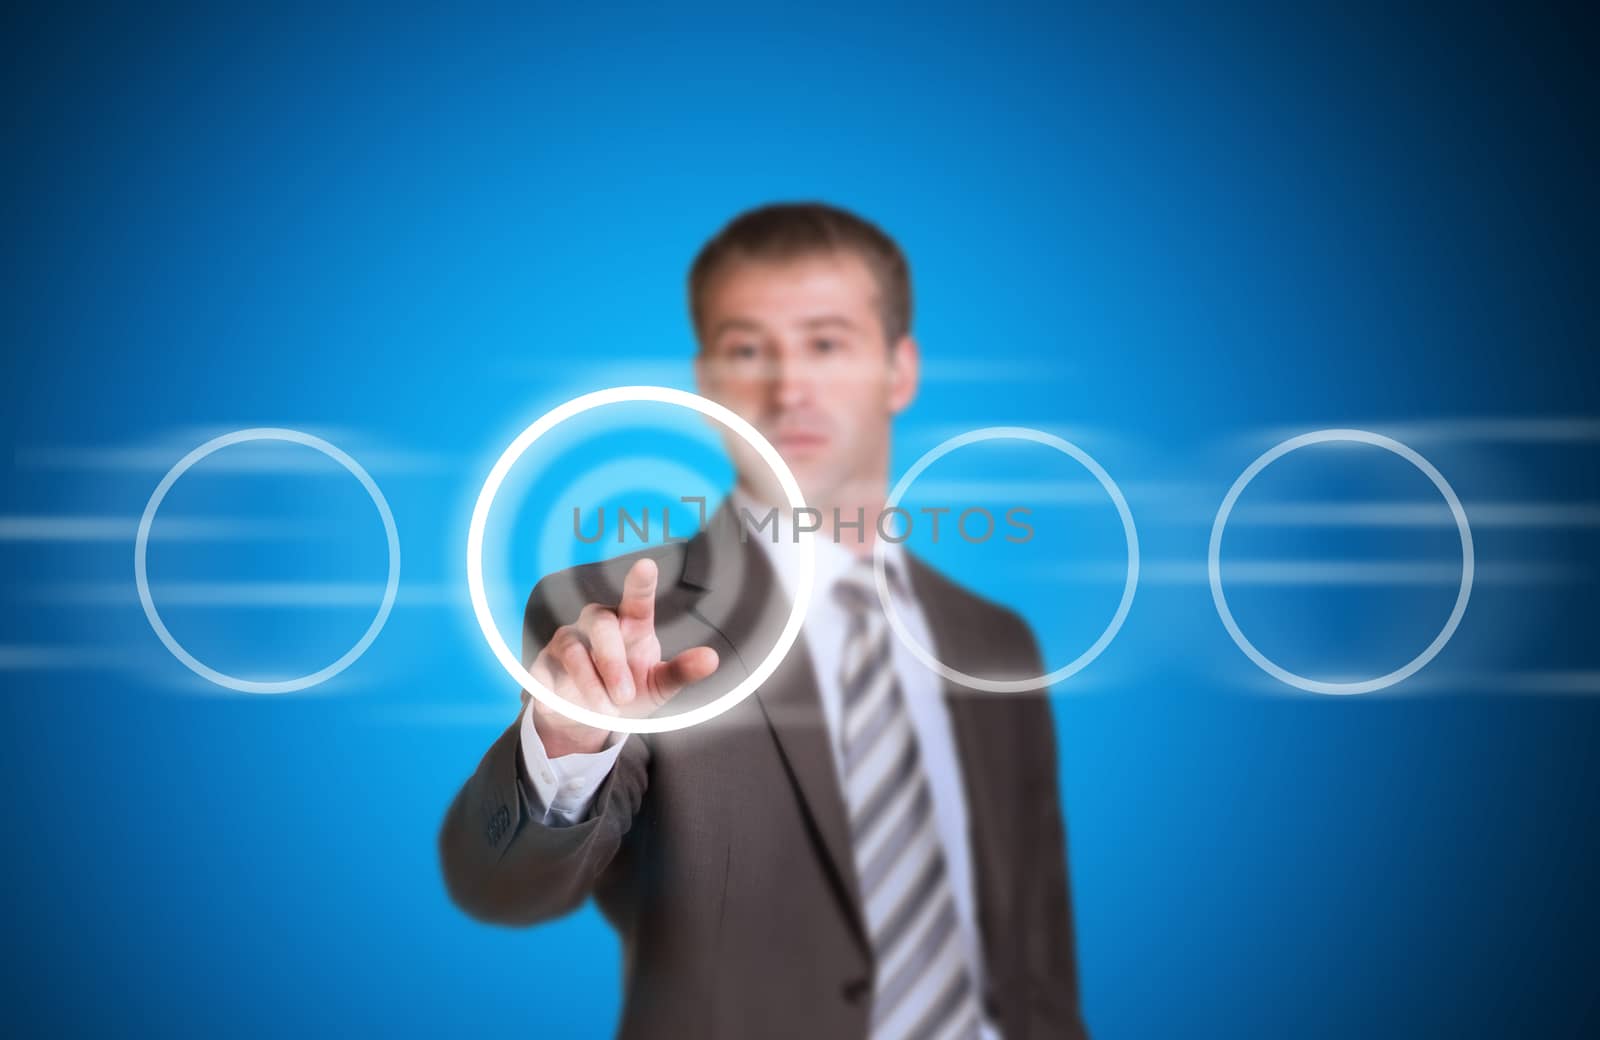 Businessman in a suit pointing her finger at the empty circle frame by cherezoff